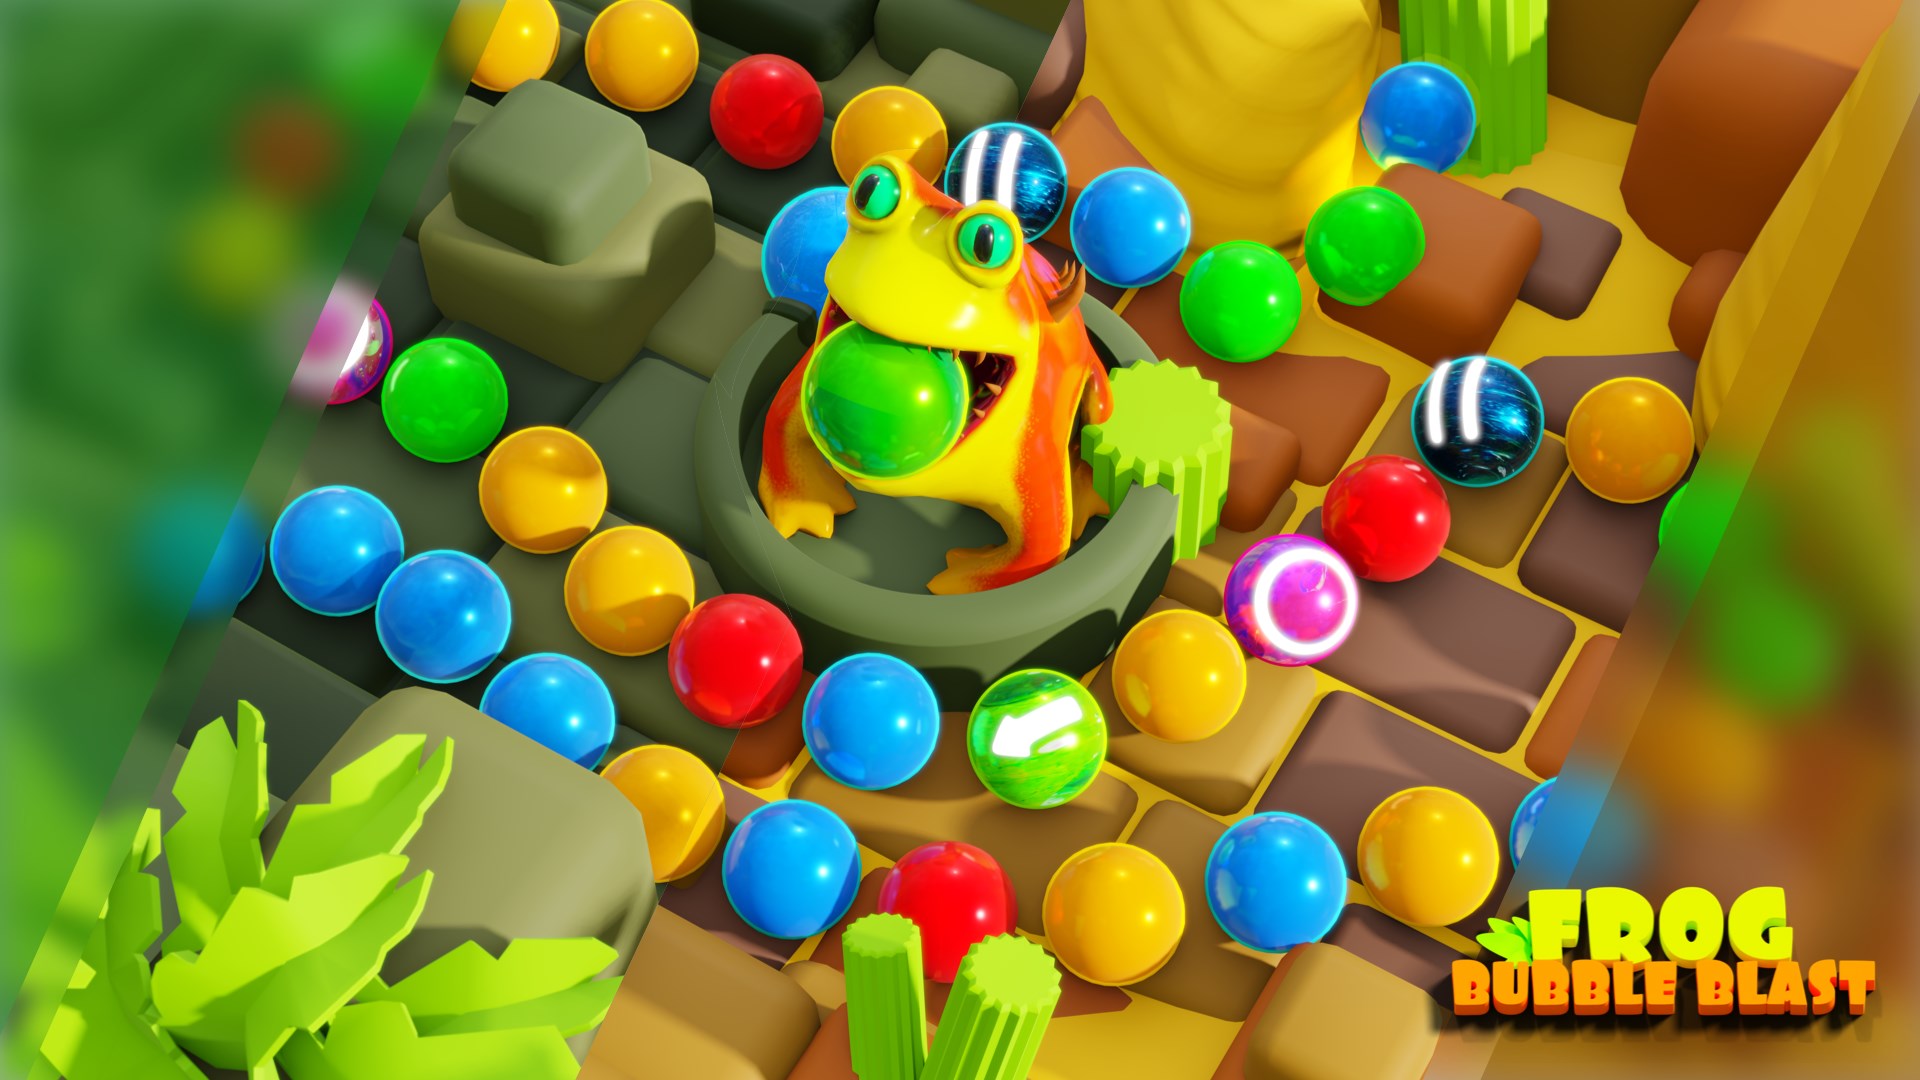 Classic Bubble Shooter New Games - Official game in the Microsoft Store